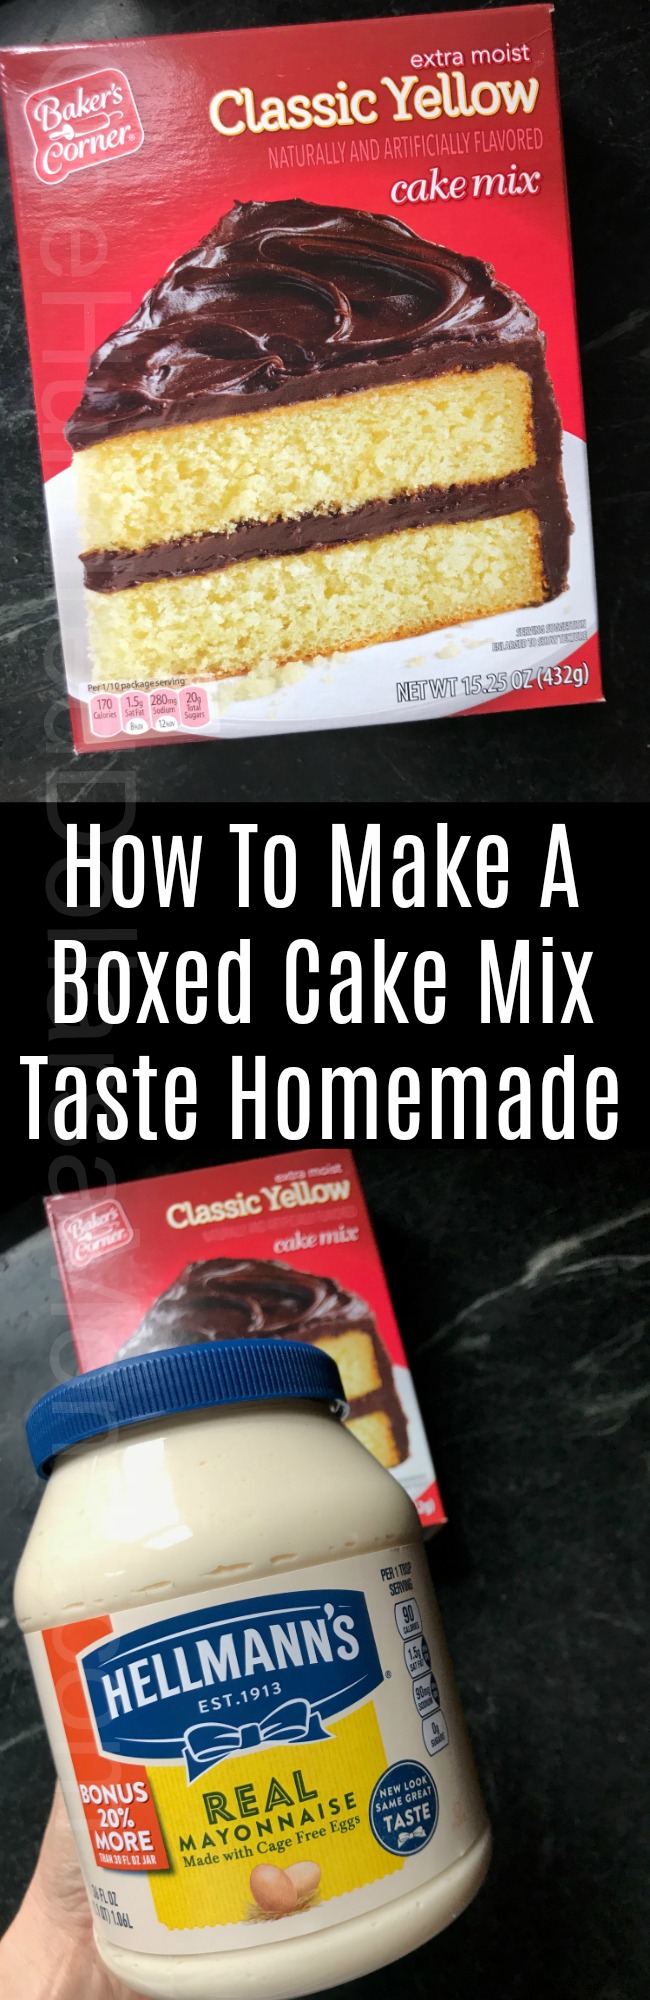 How To Make A Boxed Cake Mix Taste Homemade